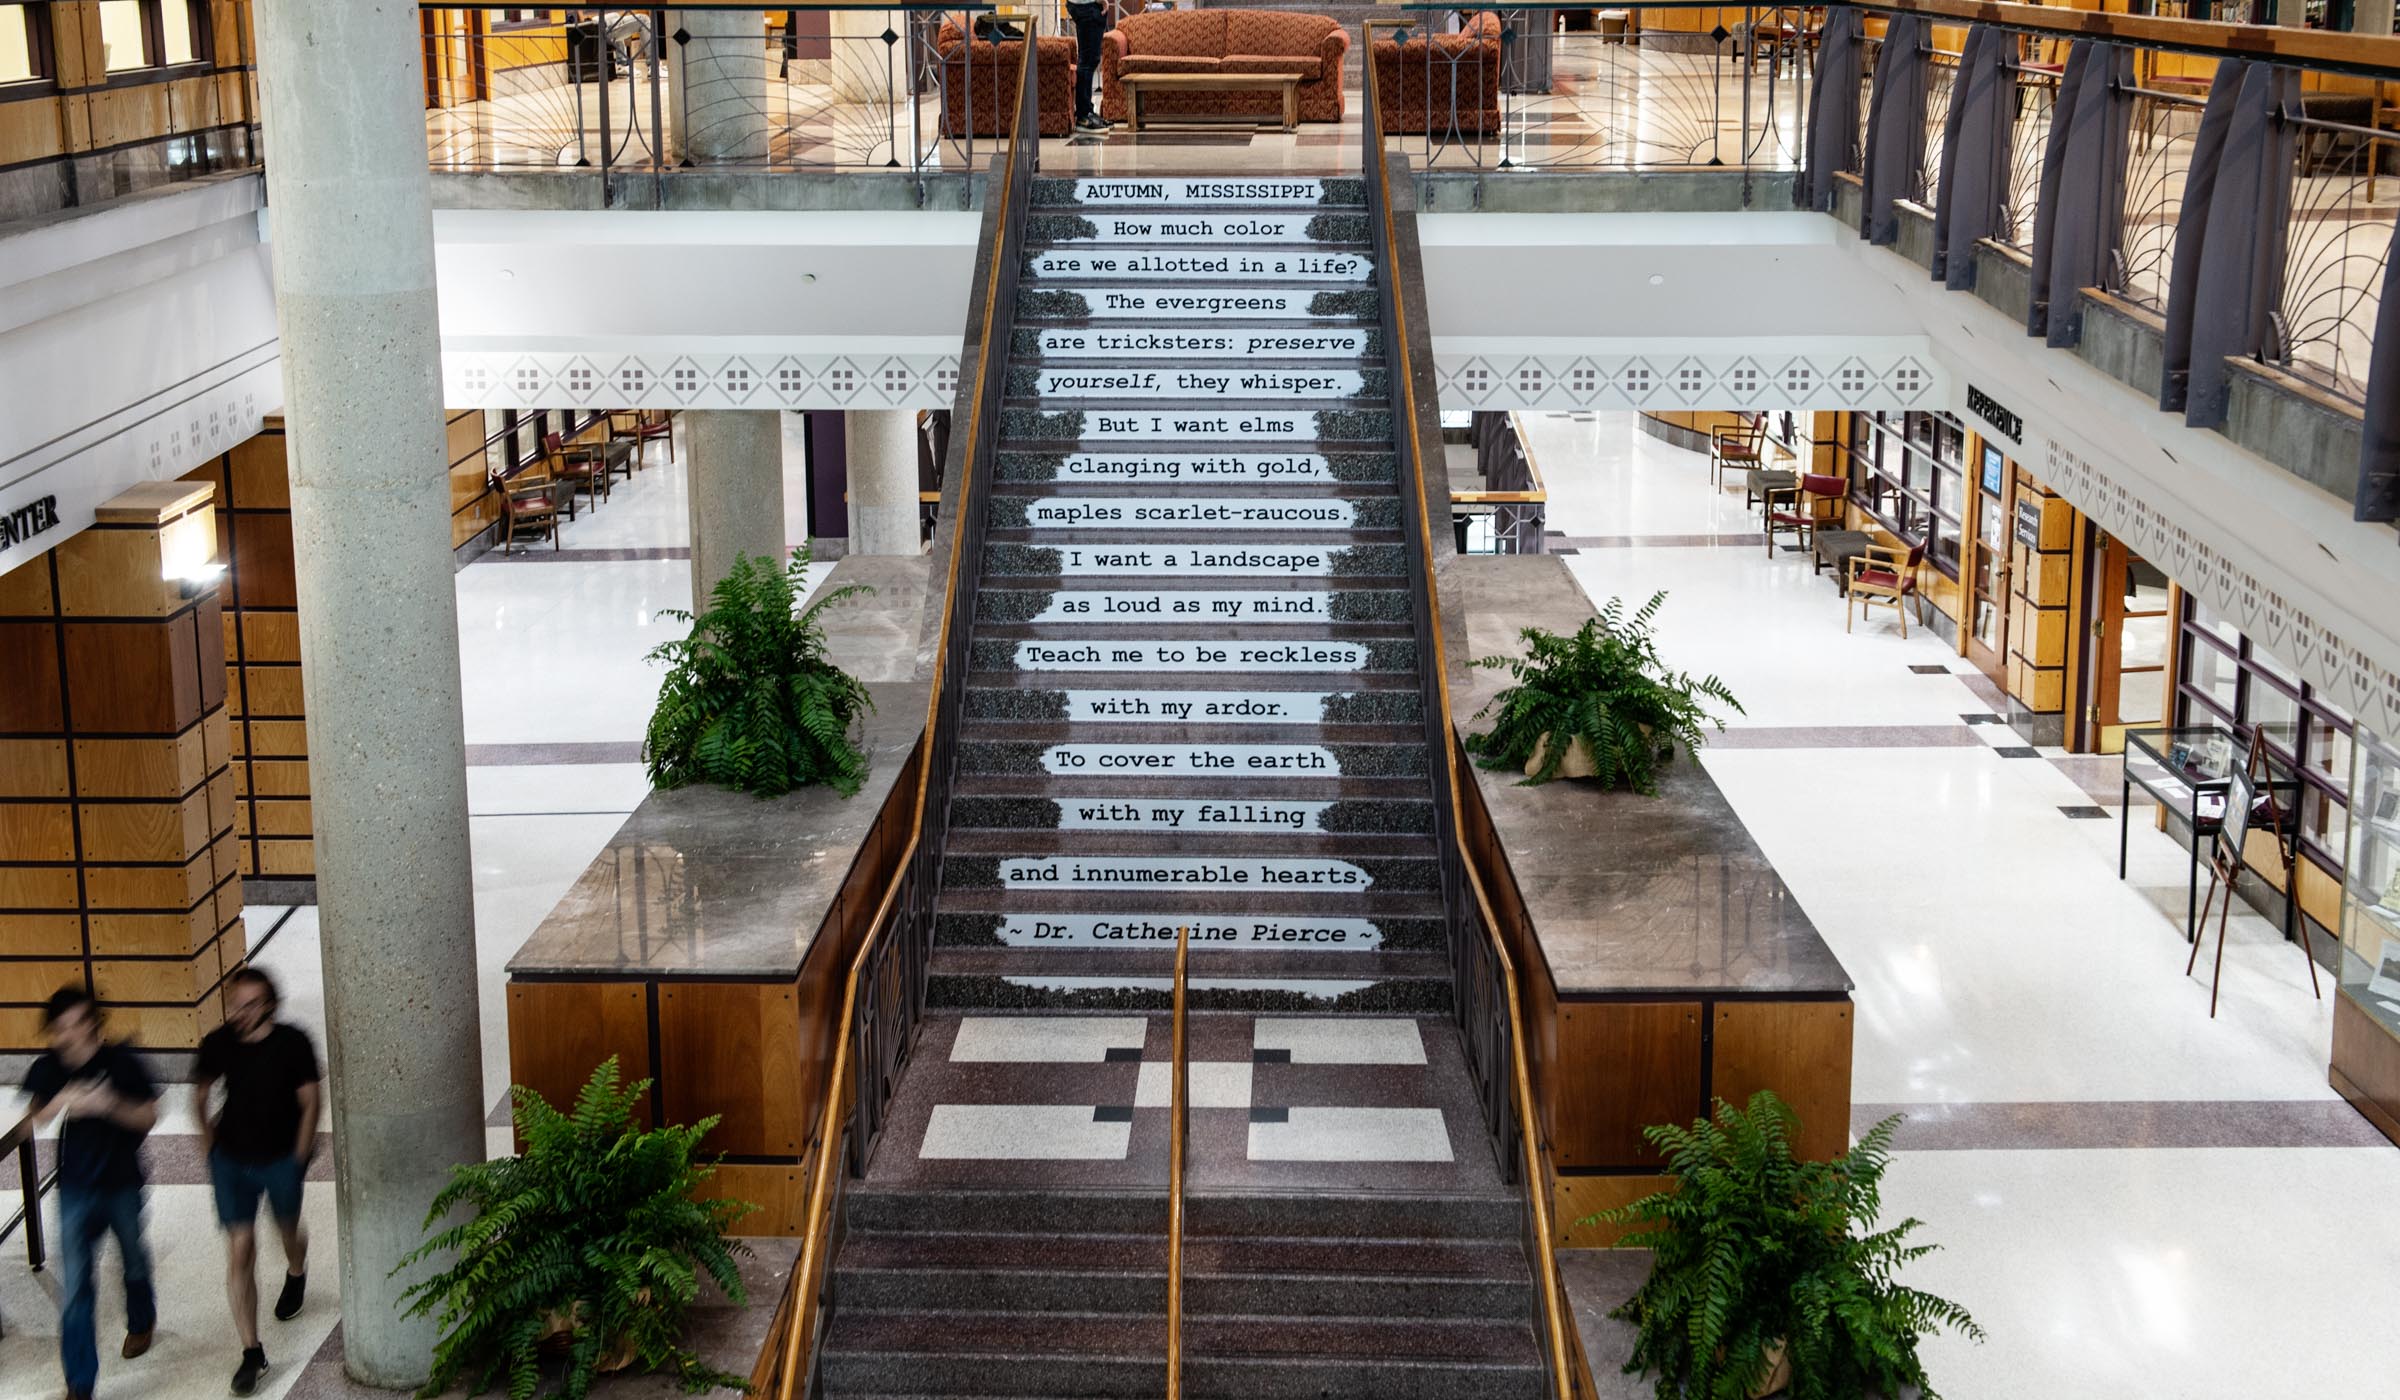 View from the second floor of Mitchell Memorial Library atrium, looking down towards the lobby and the stairs that have a poem by Mississippi Poet Laureate Catherine Pierce running down them.